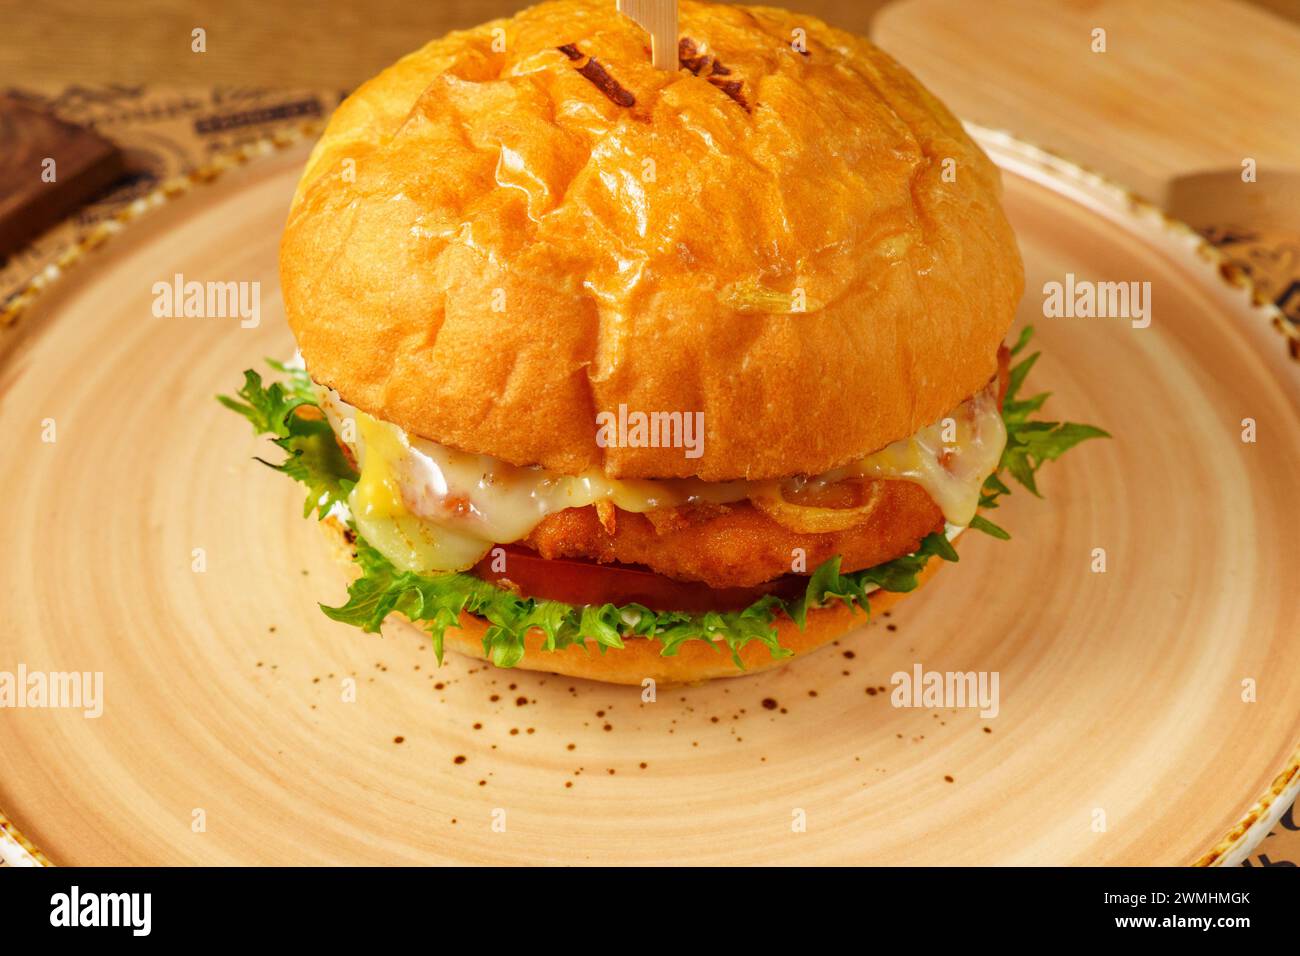 Cheeseburger With Lettuce and Tomato on Bun, close up Stock Photo